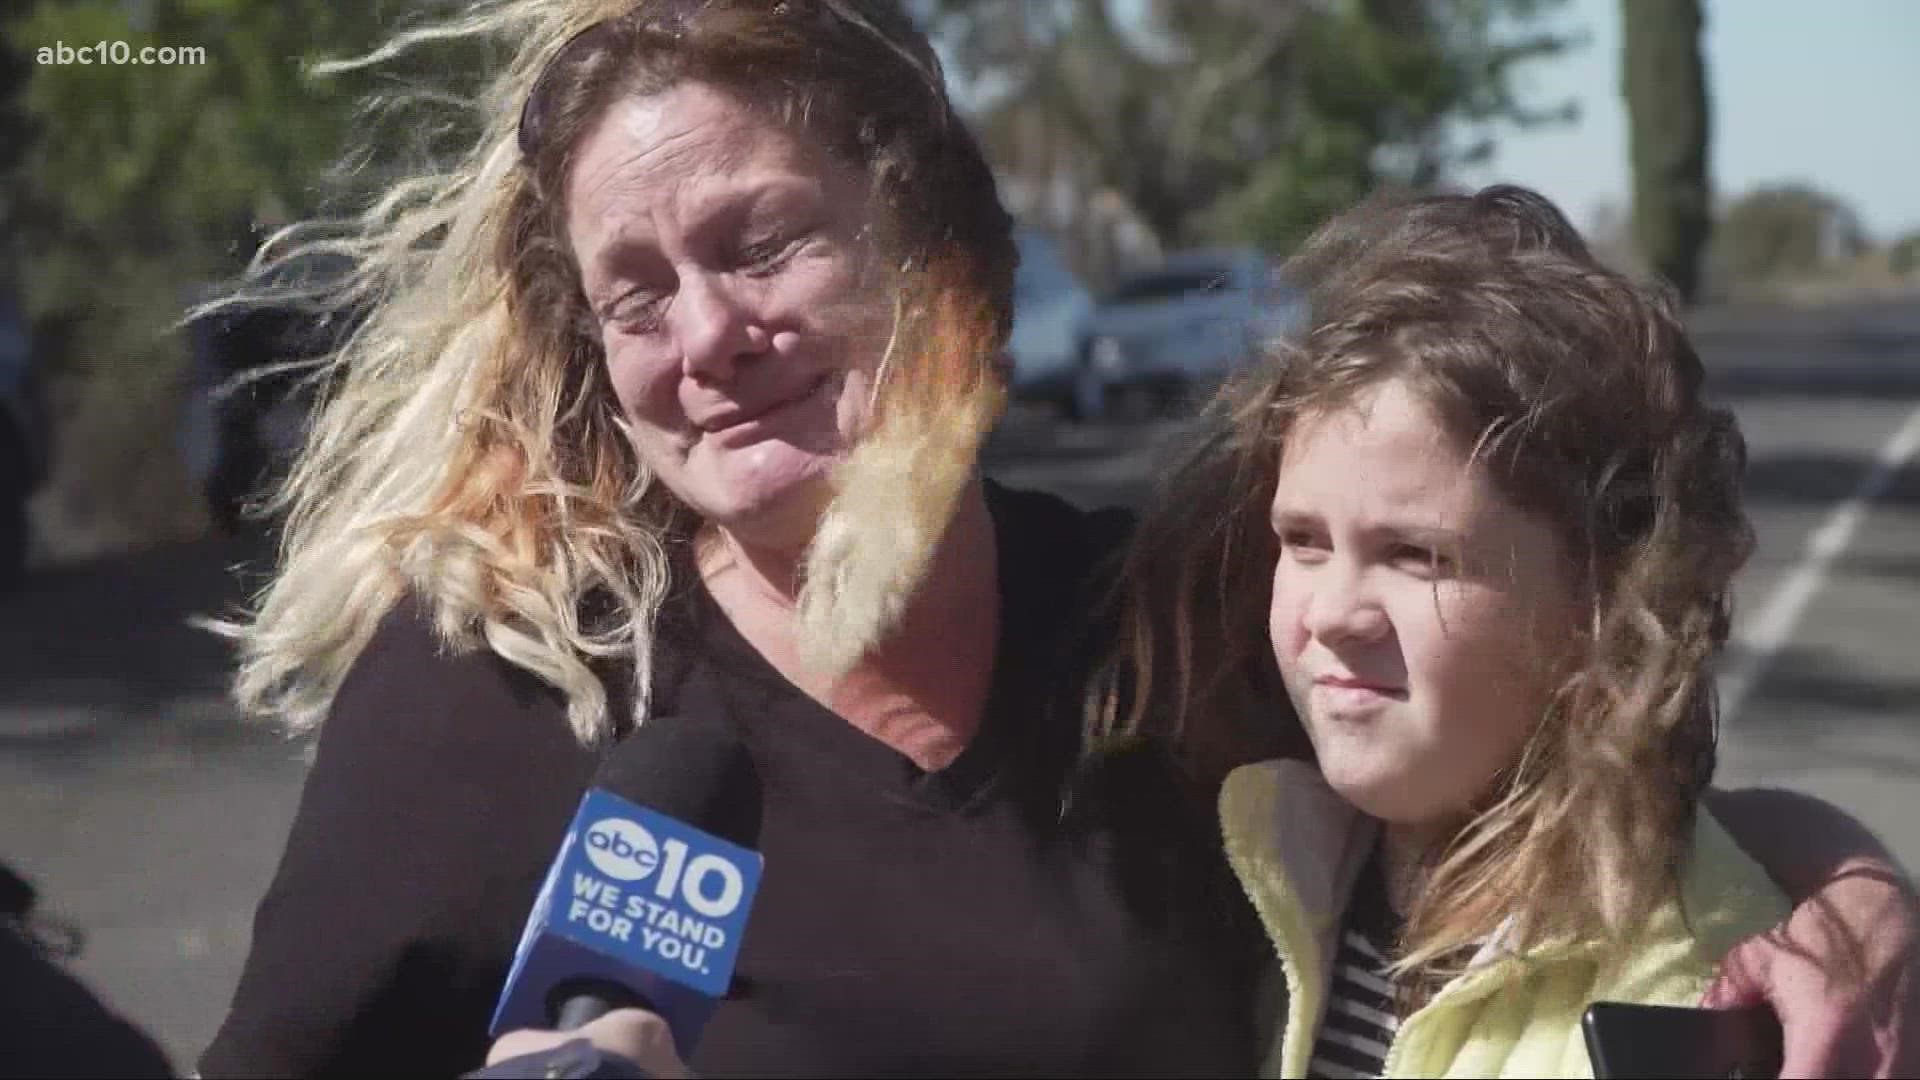 Lena Howland spoke with a mother and daughter who lost their home in a massive fire.